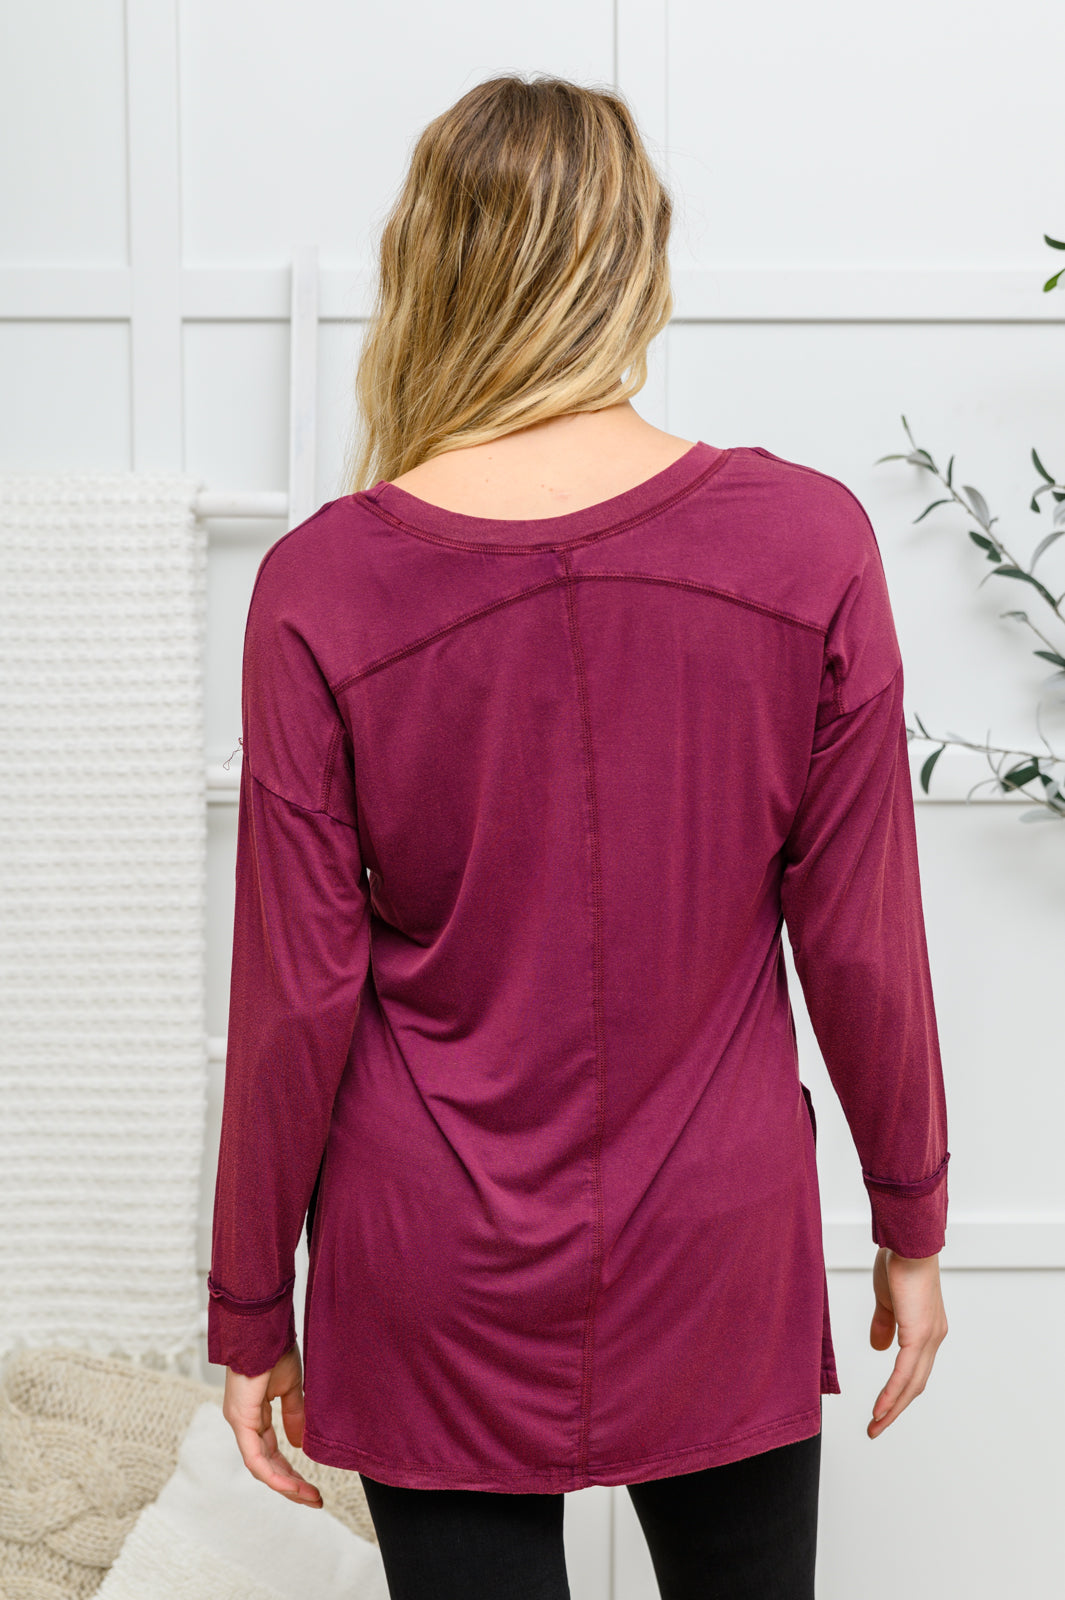 The Long Sleeve Knit Top With Pocket In Burgundy features a lightweight, stretchy fabric that shapes a round neckline with long sleeves, and a hi-low hem with side slits.